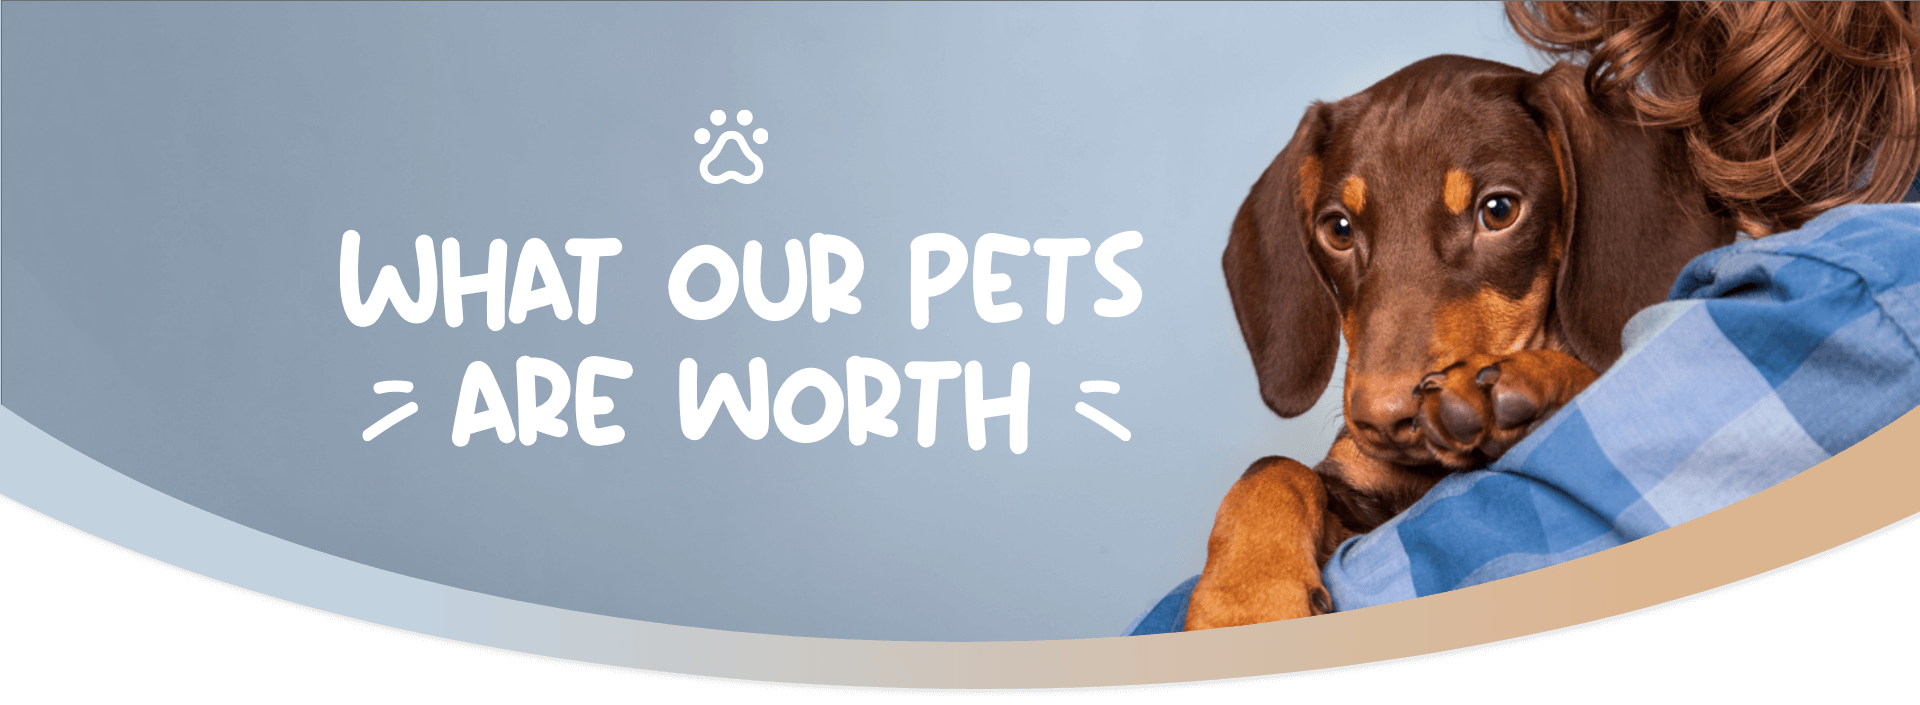 What-Our-Pets-Are-Worth